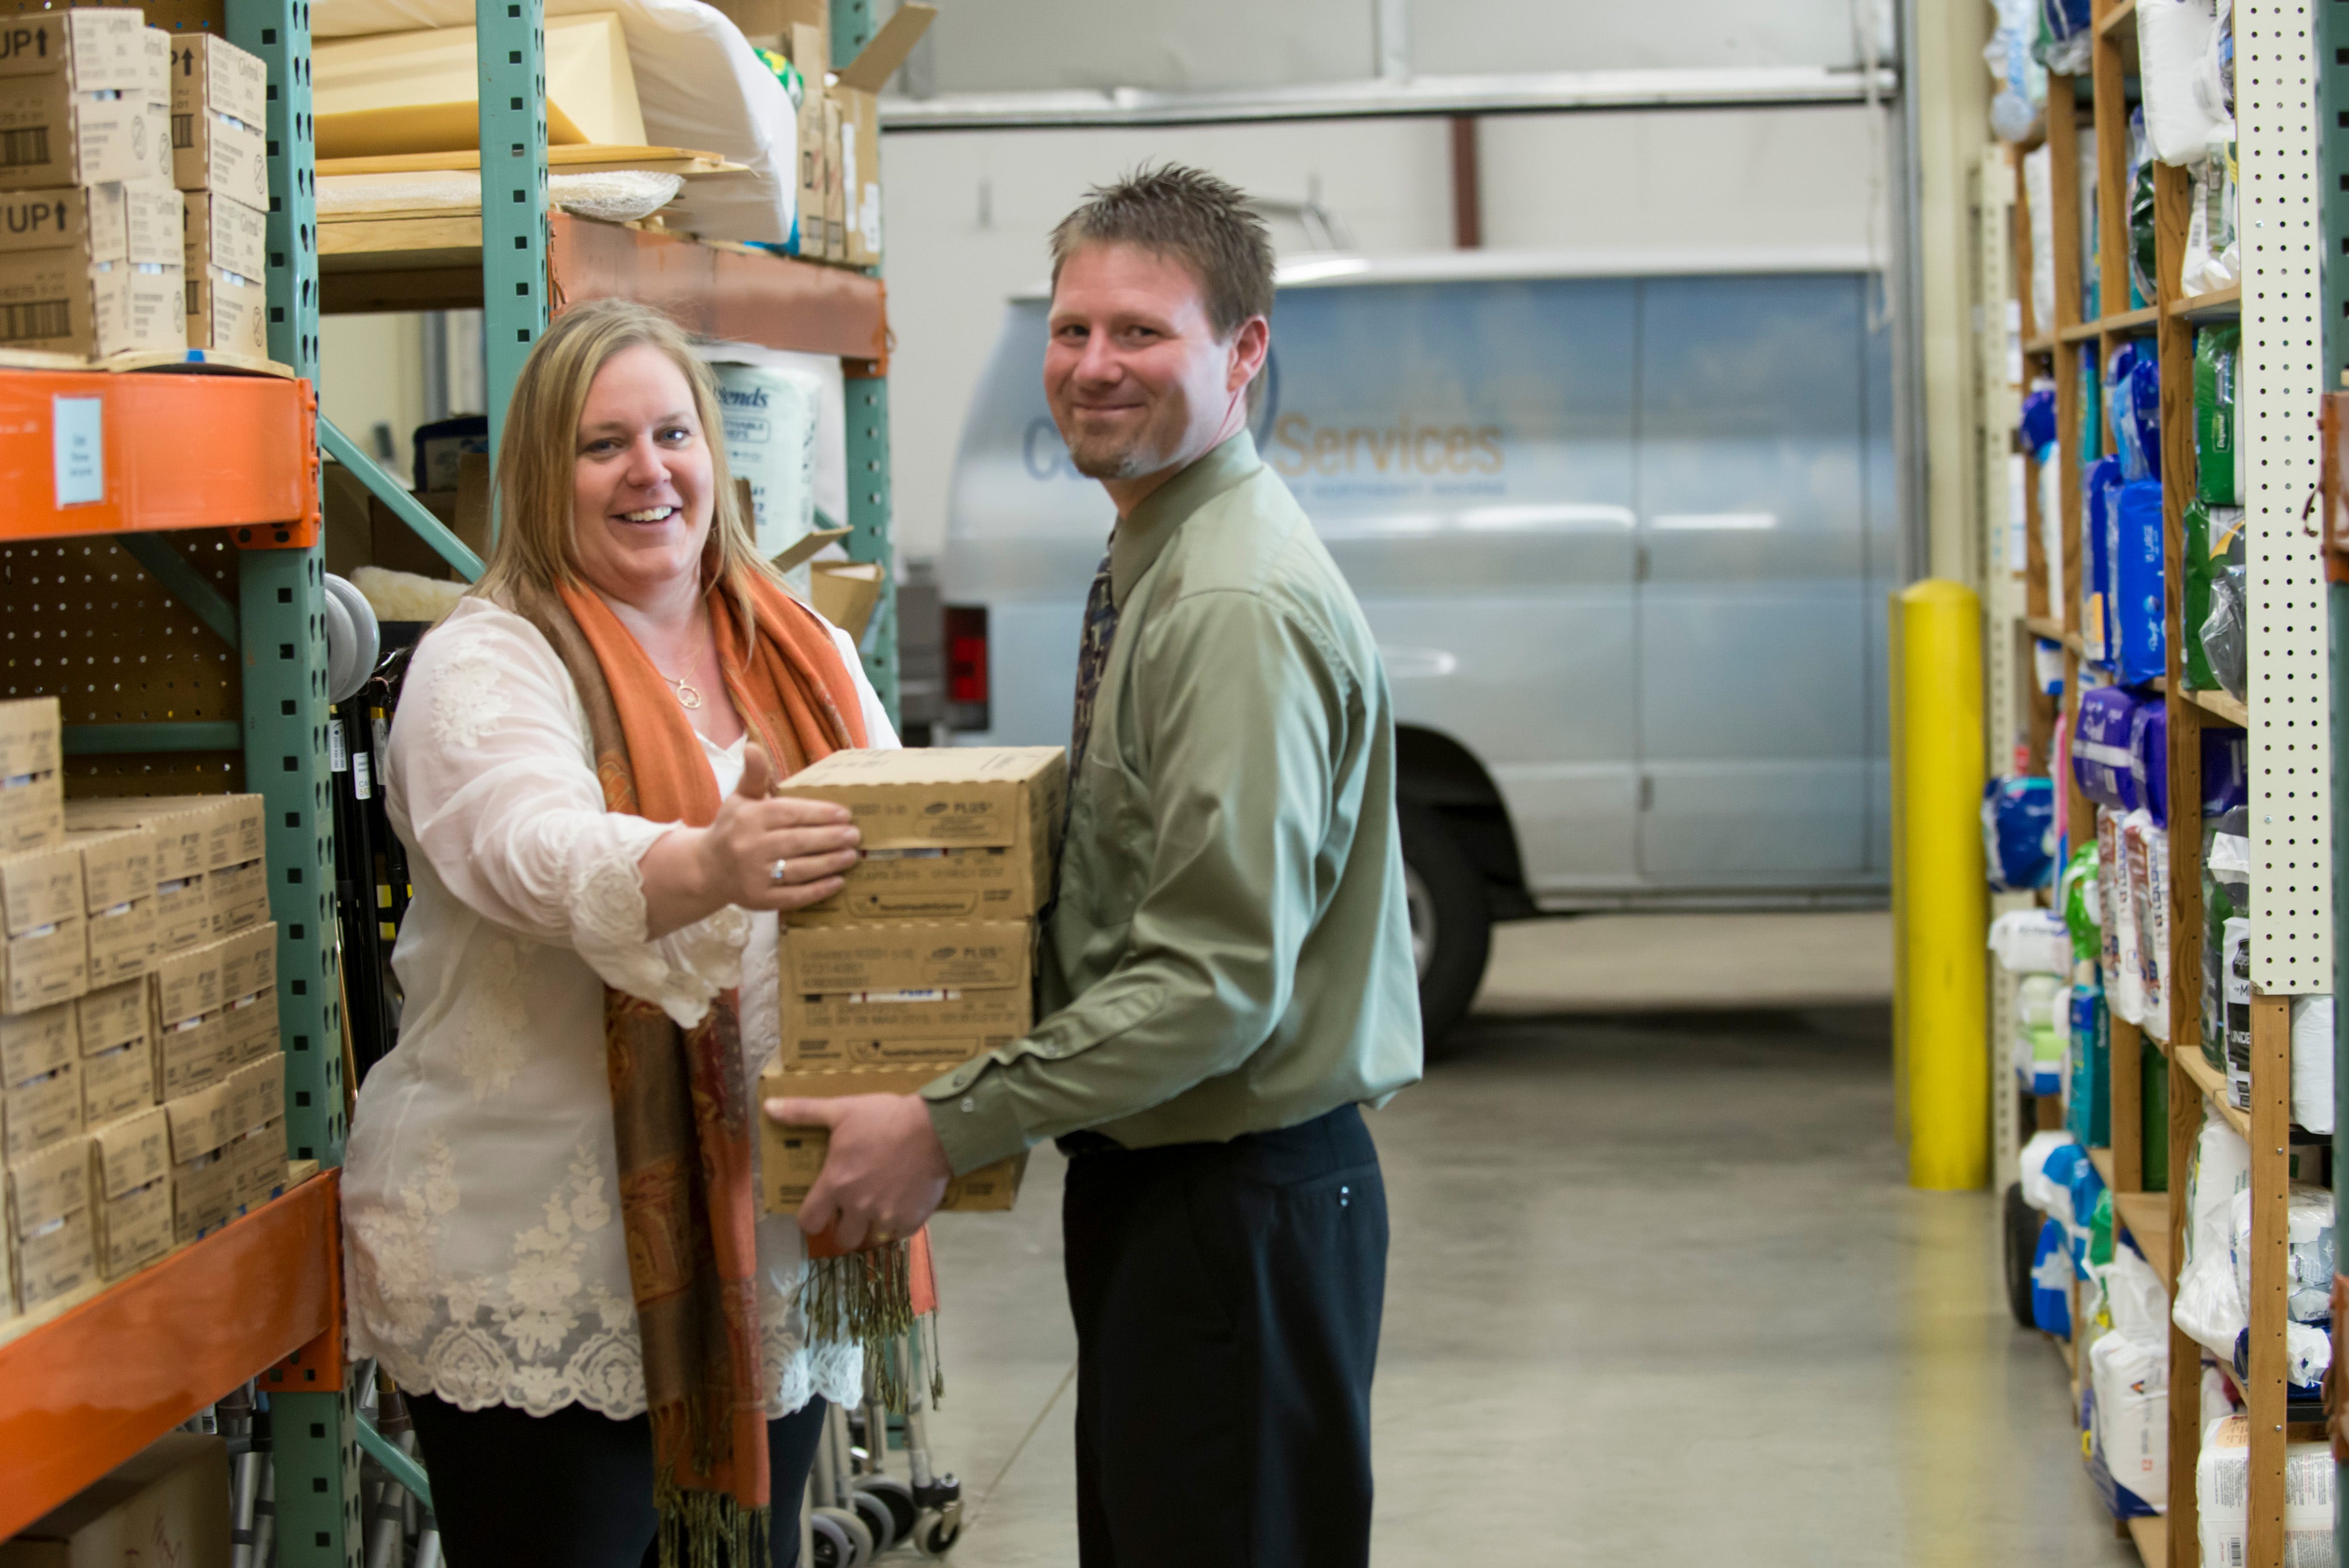 Cancer Services staff carrying equipment in warehouse